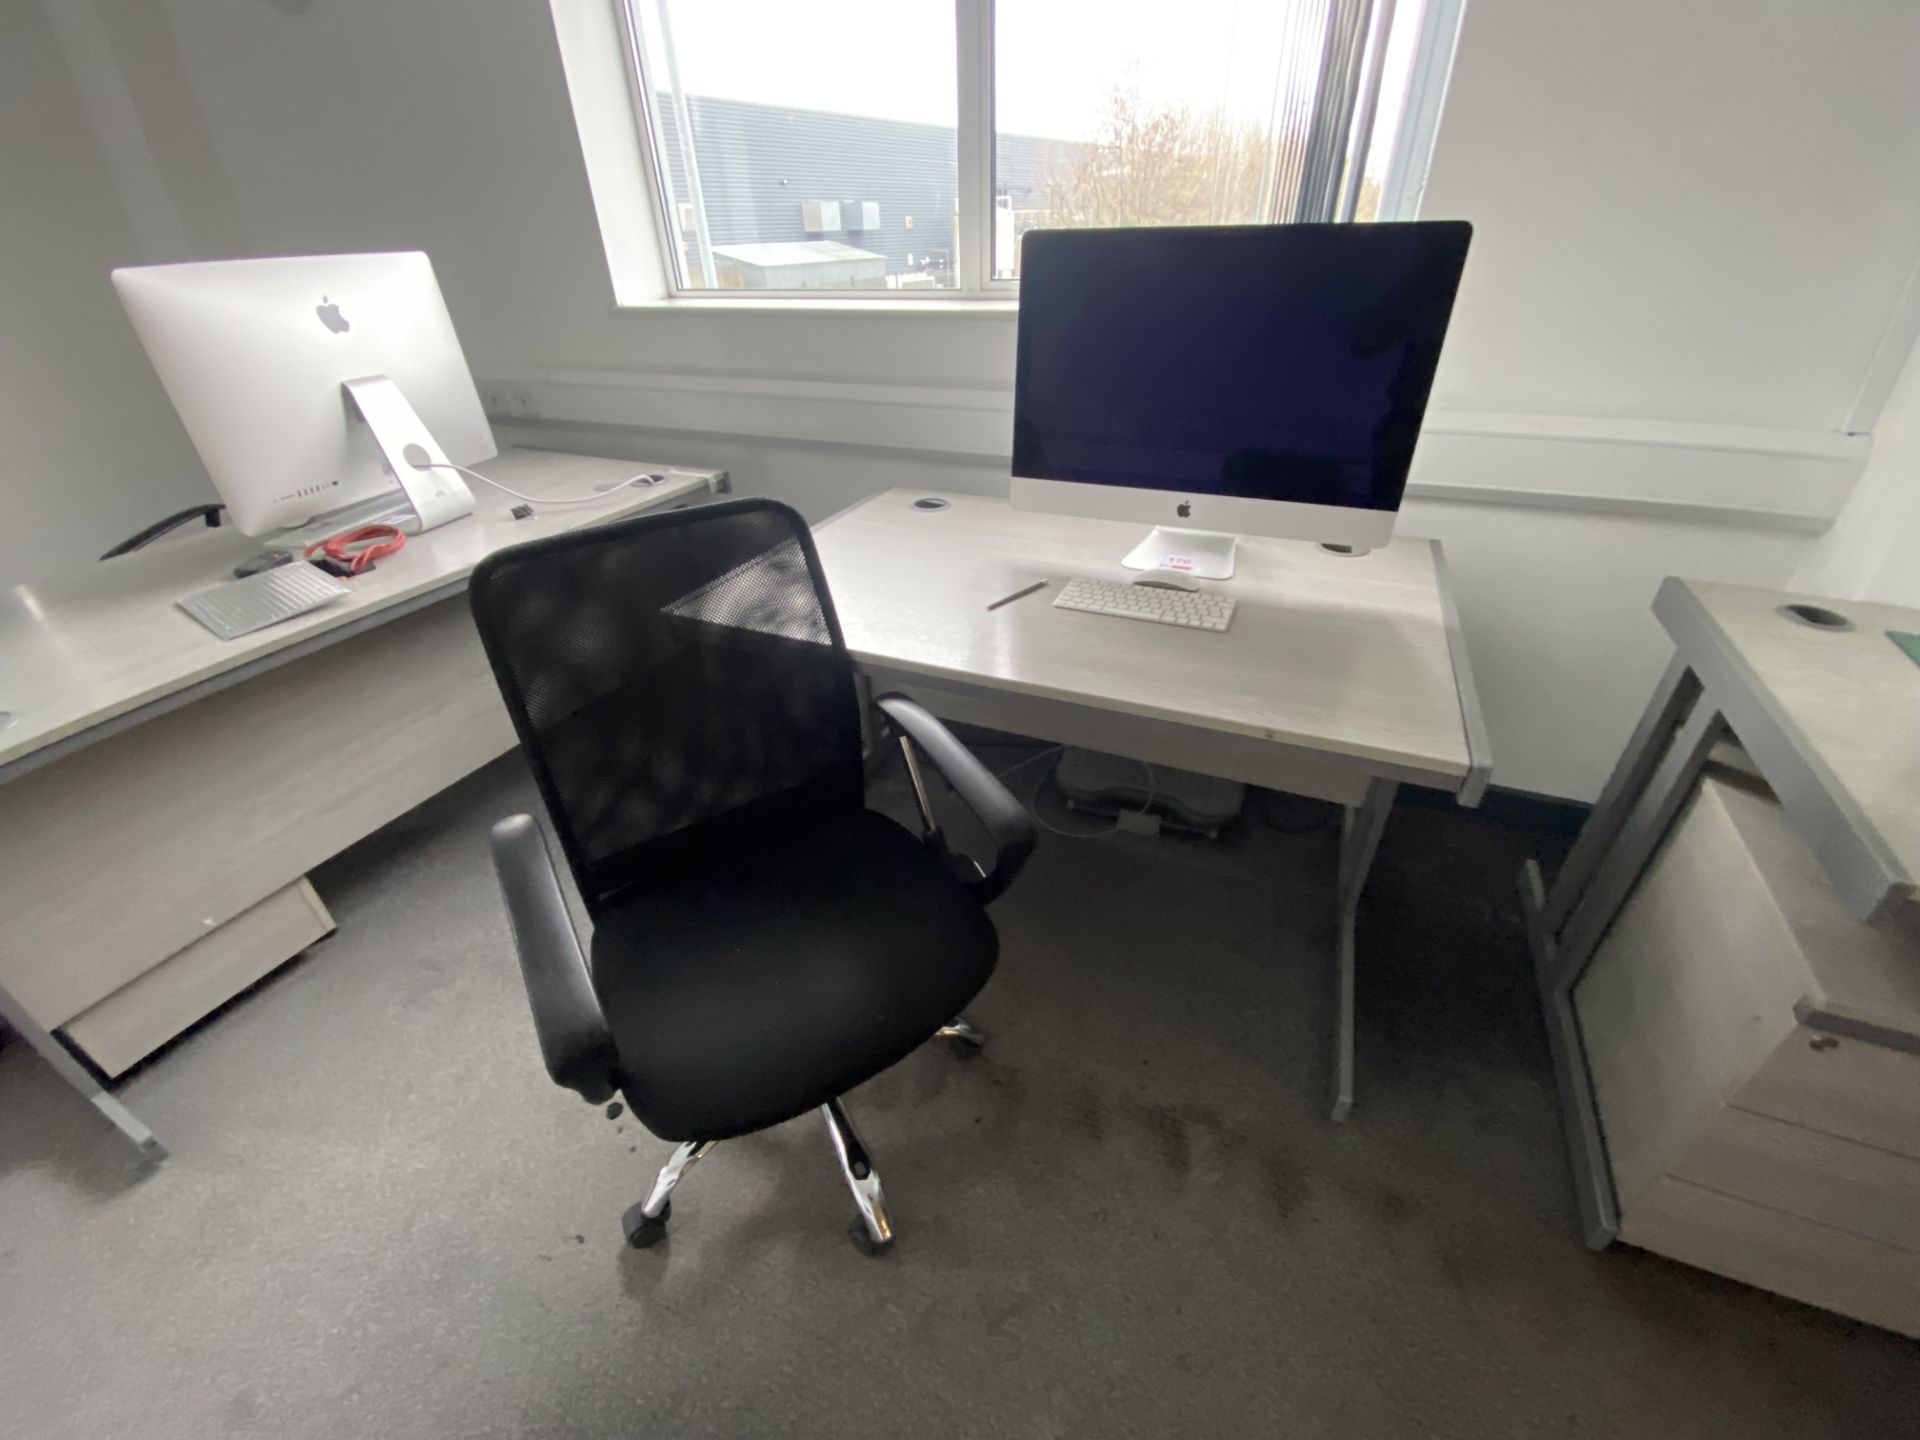 Large/medium grey wood effect desk, pedestal, two chairs - Image 2 of 3